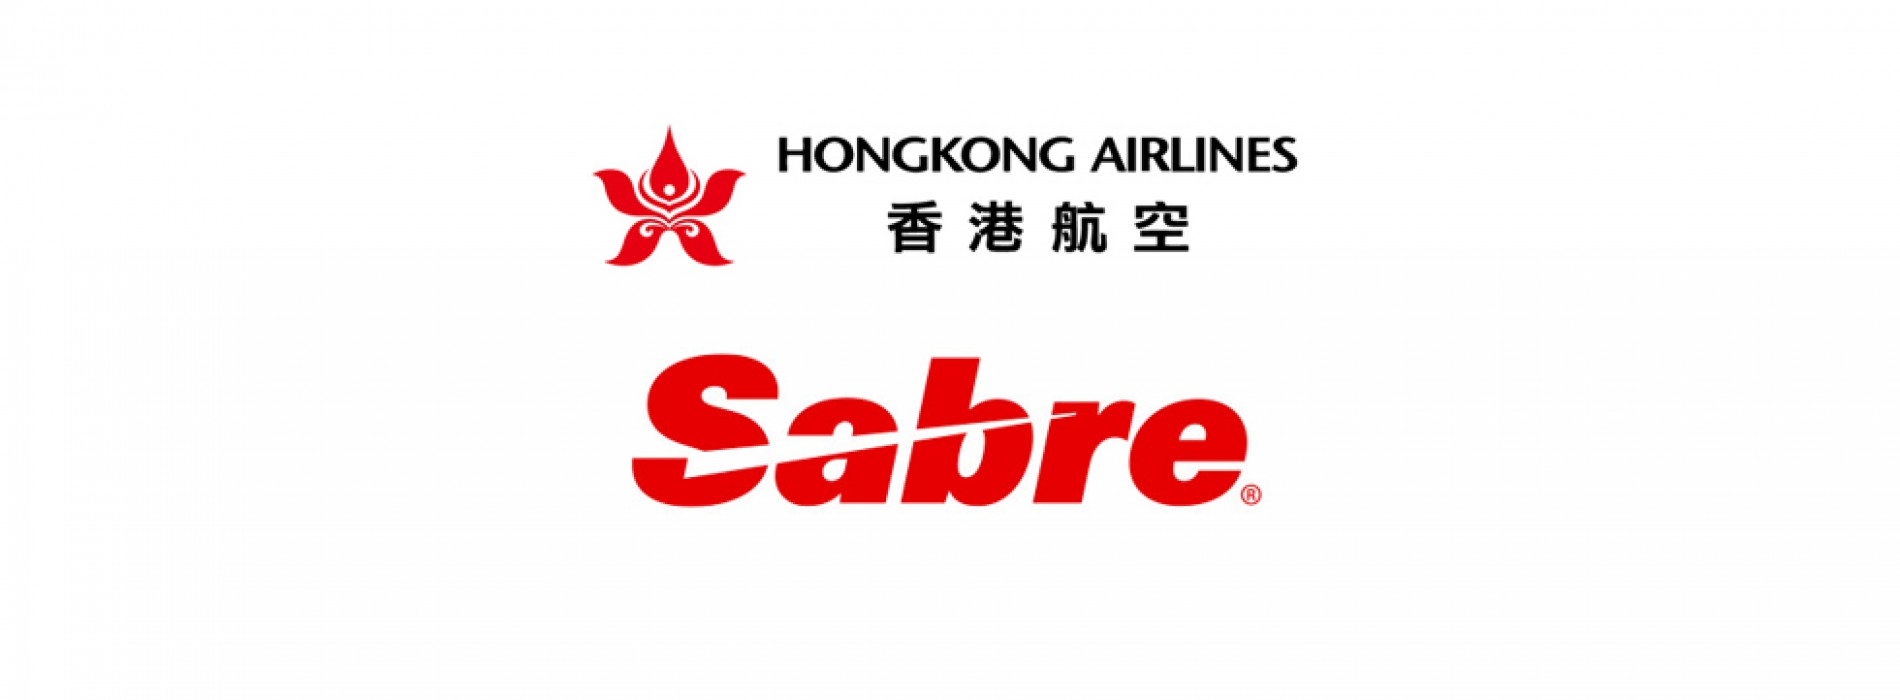 Hong Kong Airlines purchases Sabre MIDT Network Plus data